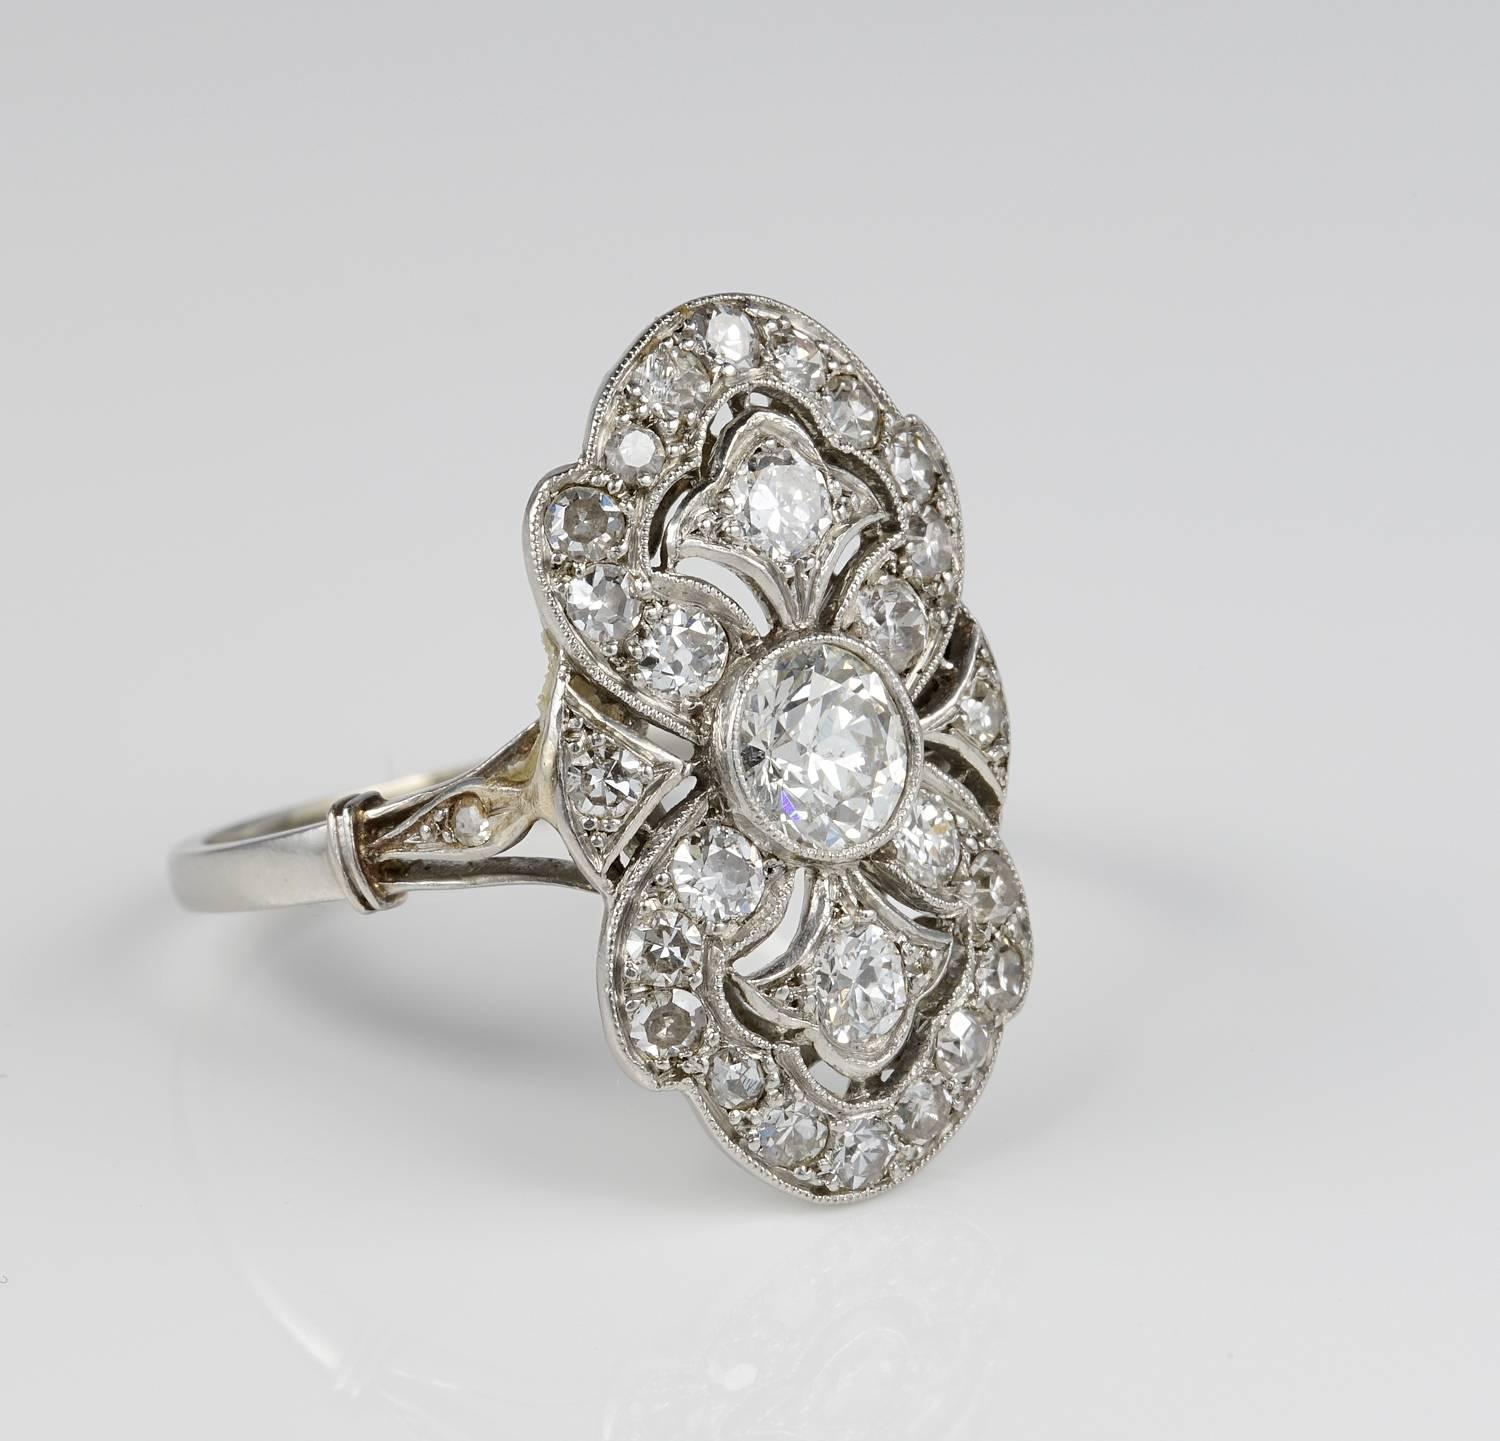 Extraordinary French example of Belle Epoque period panel ring, 1900 ca.
Bearing French hallmarks, all solid Platinum.
Exquisitely designed in an intricate flat panel overwhelmed by Diamonds.
Centre Diamond is .65 Ct with more and more Diamonds